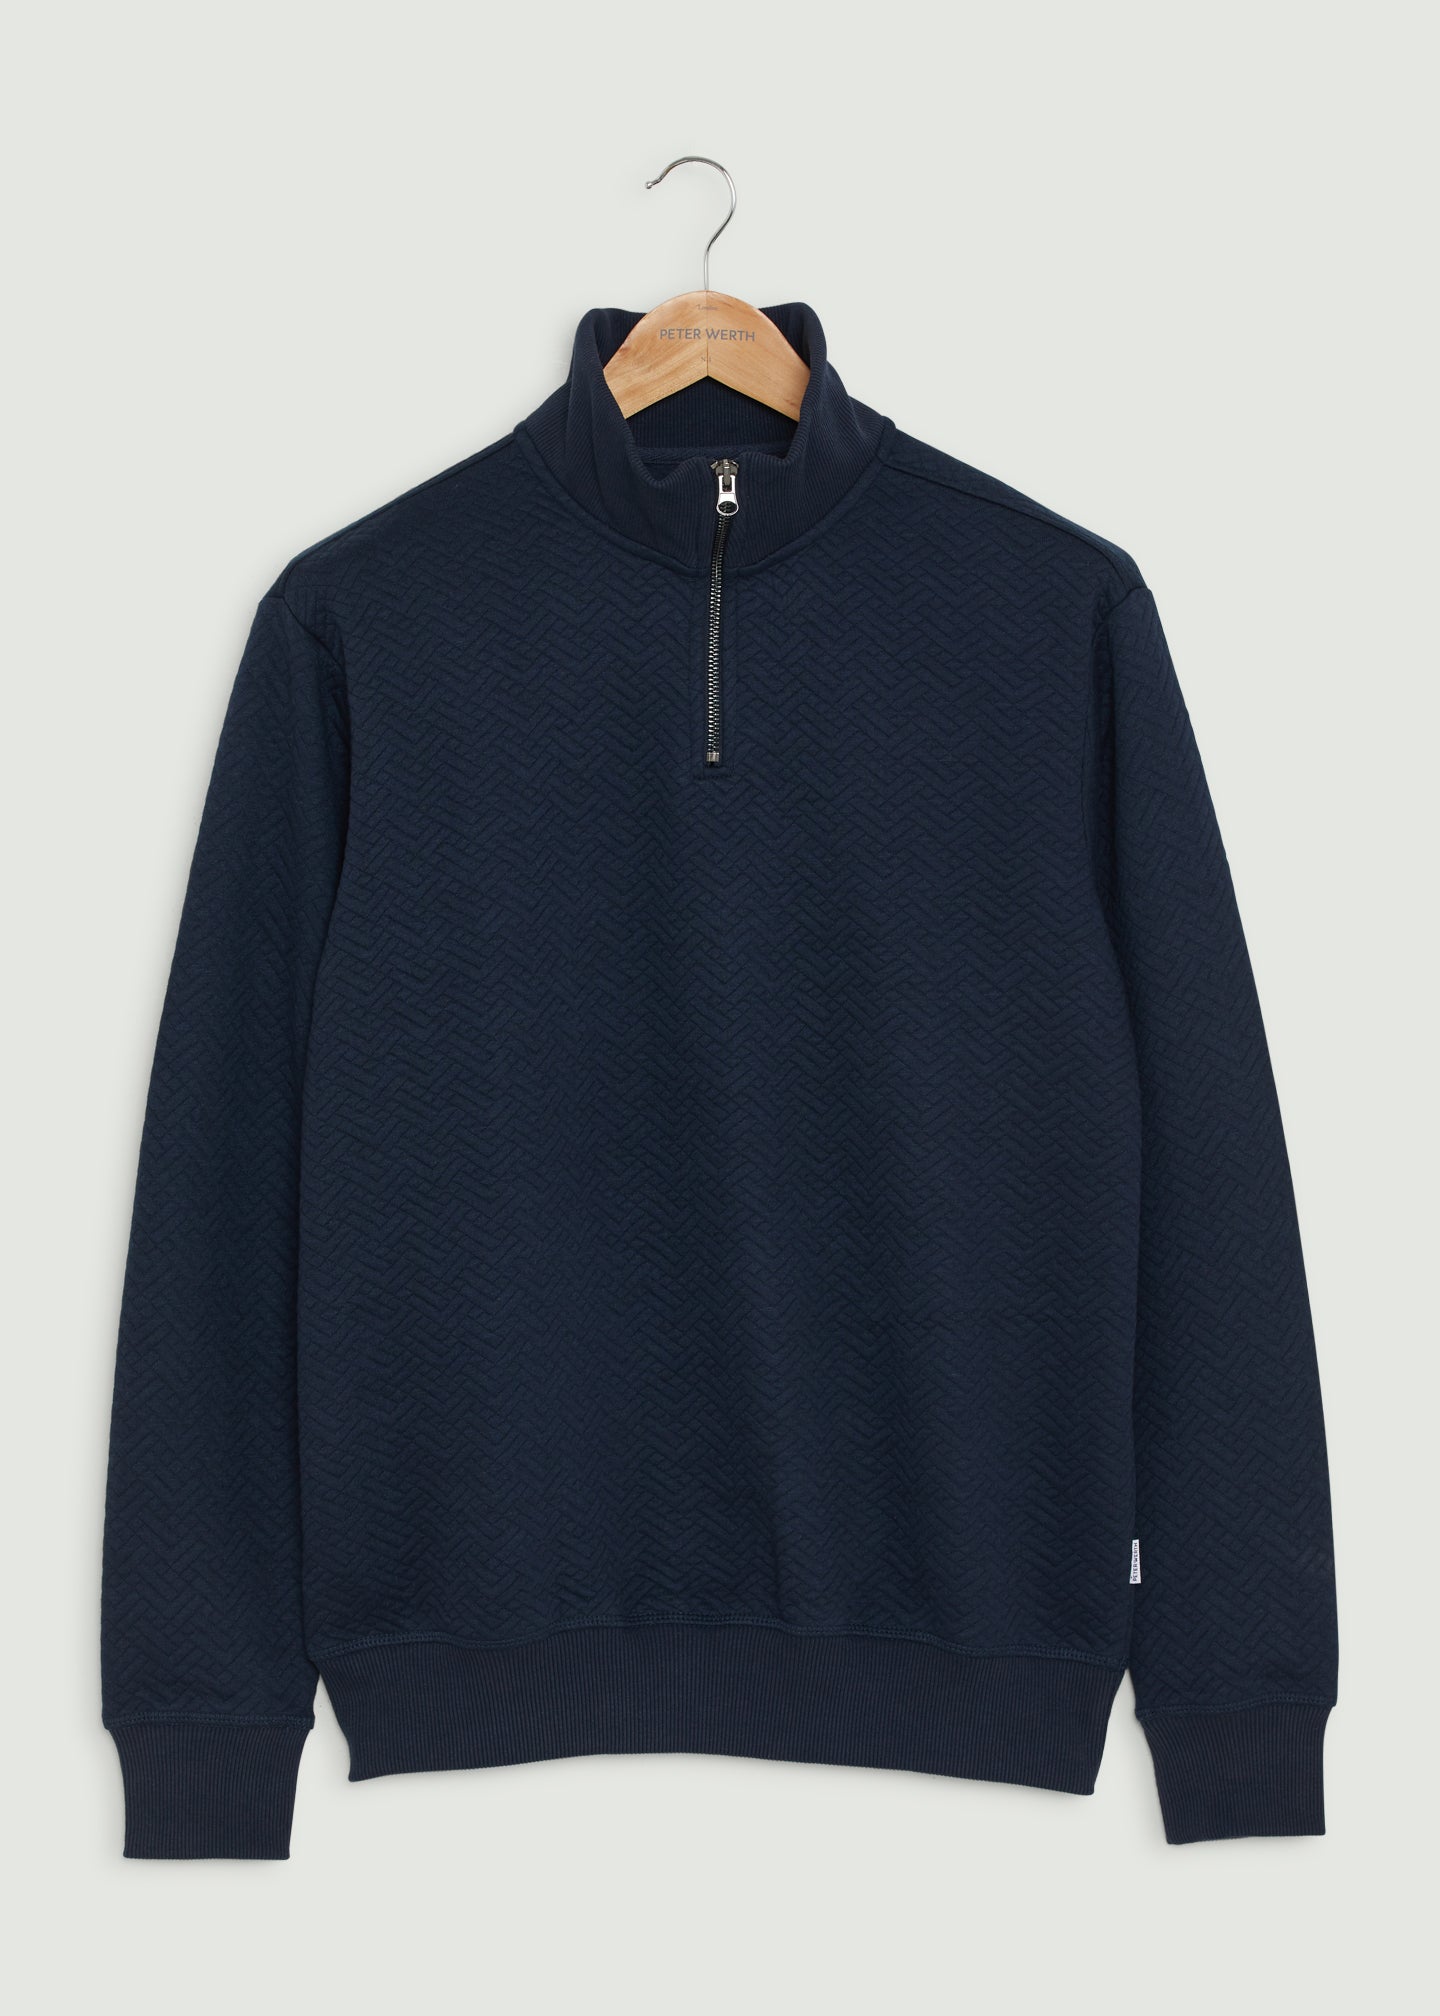 Peter Werth Jumpers & Sweaters For Men